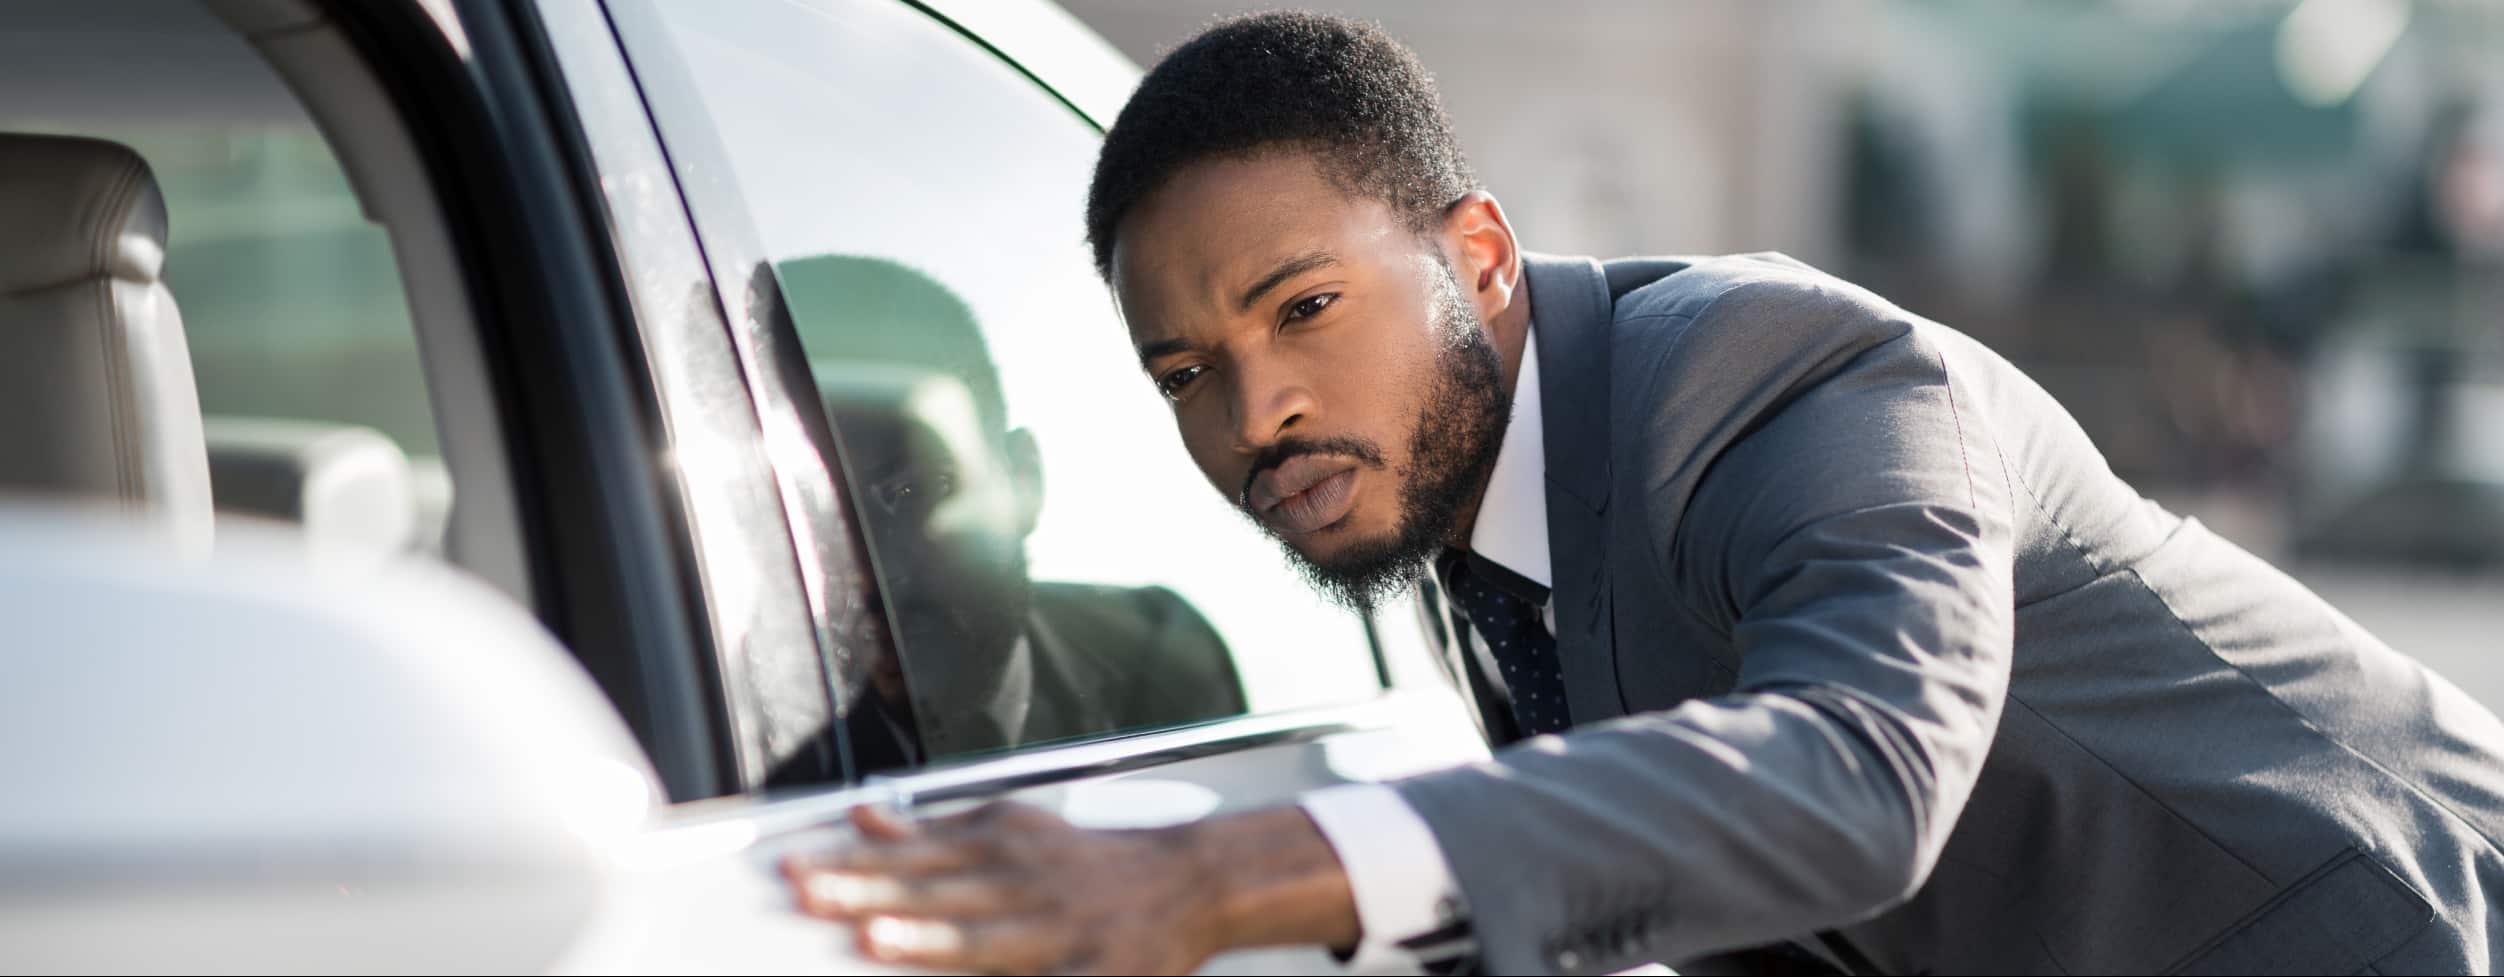 A salesperson wearing a suit checks the outside of a car.